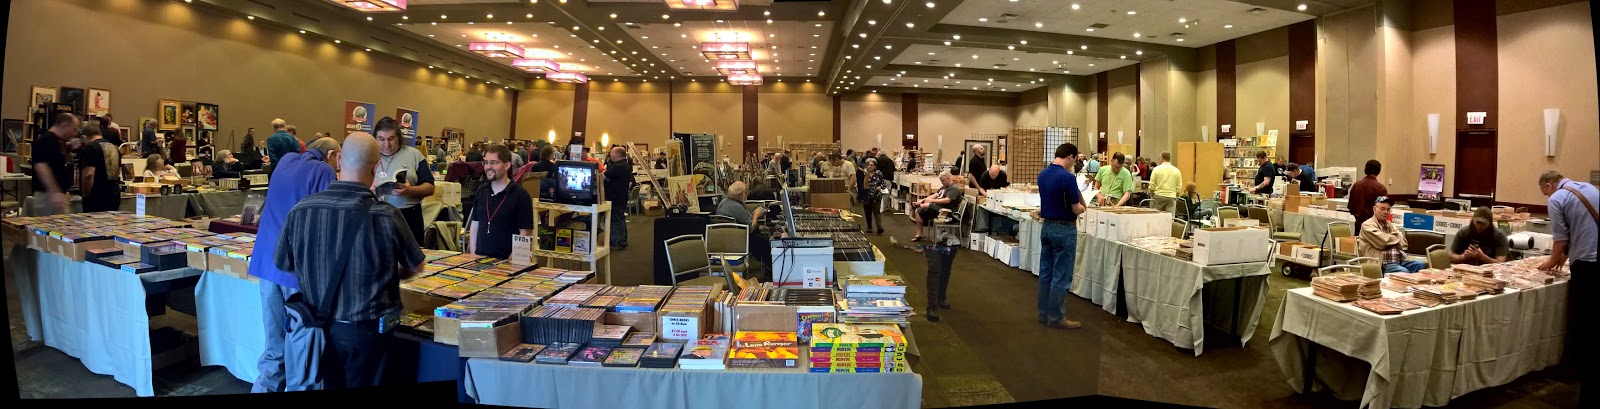 Dealer's room at Windy City Pulp and Paper 2015